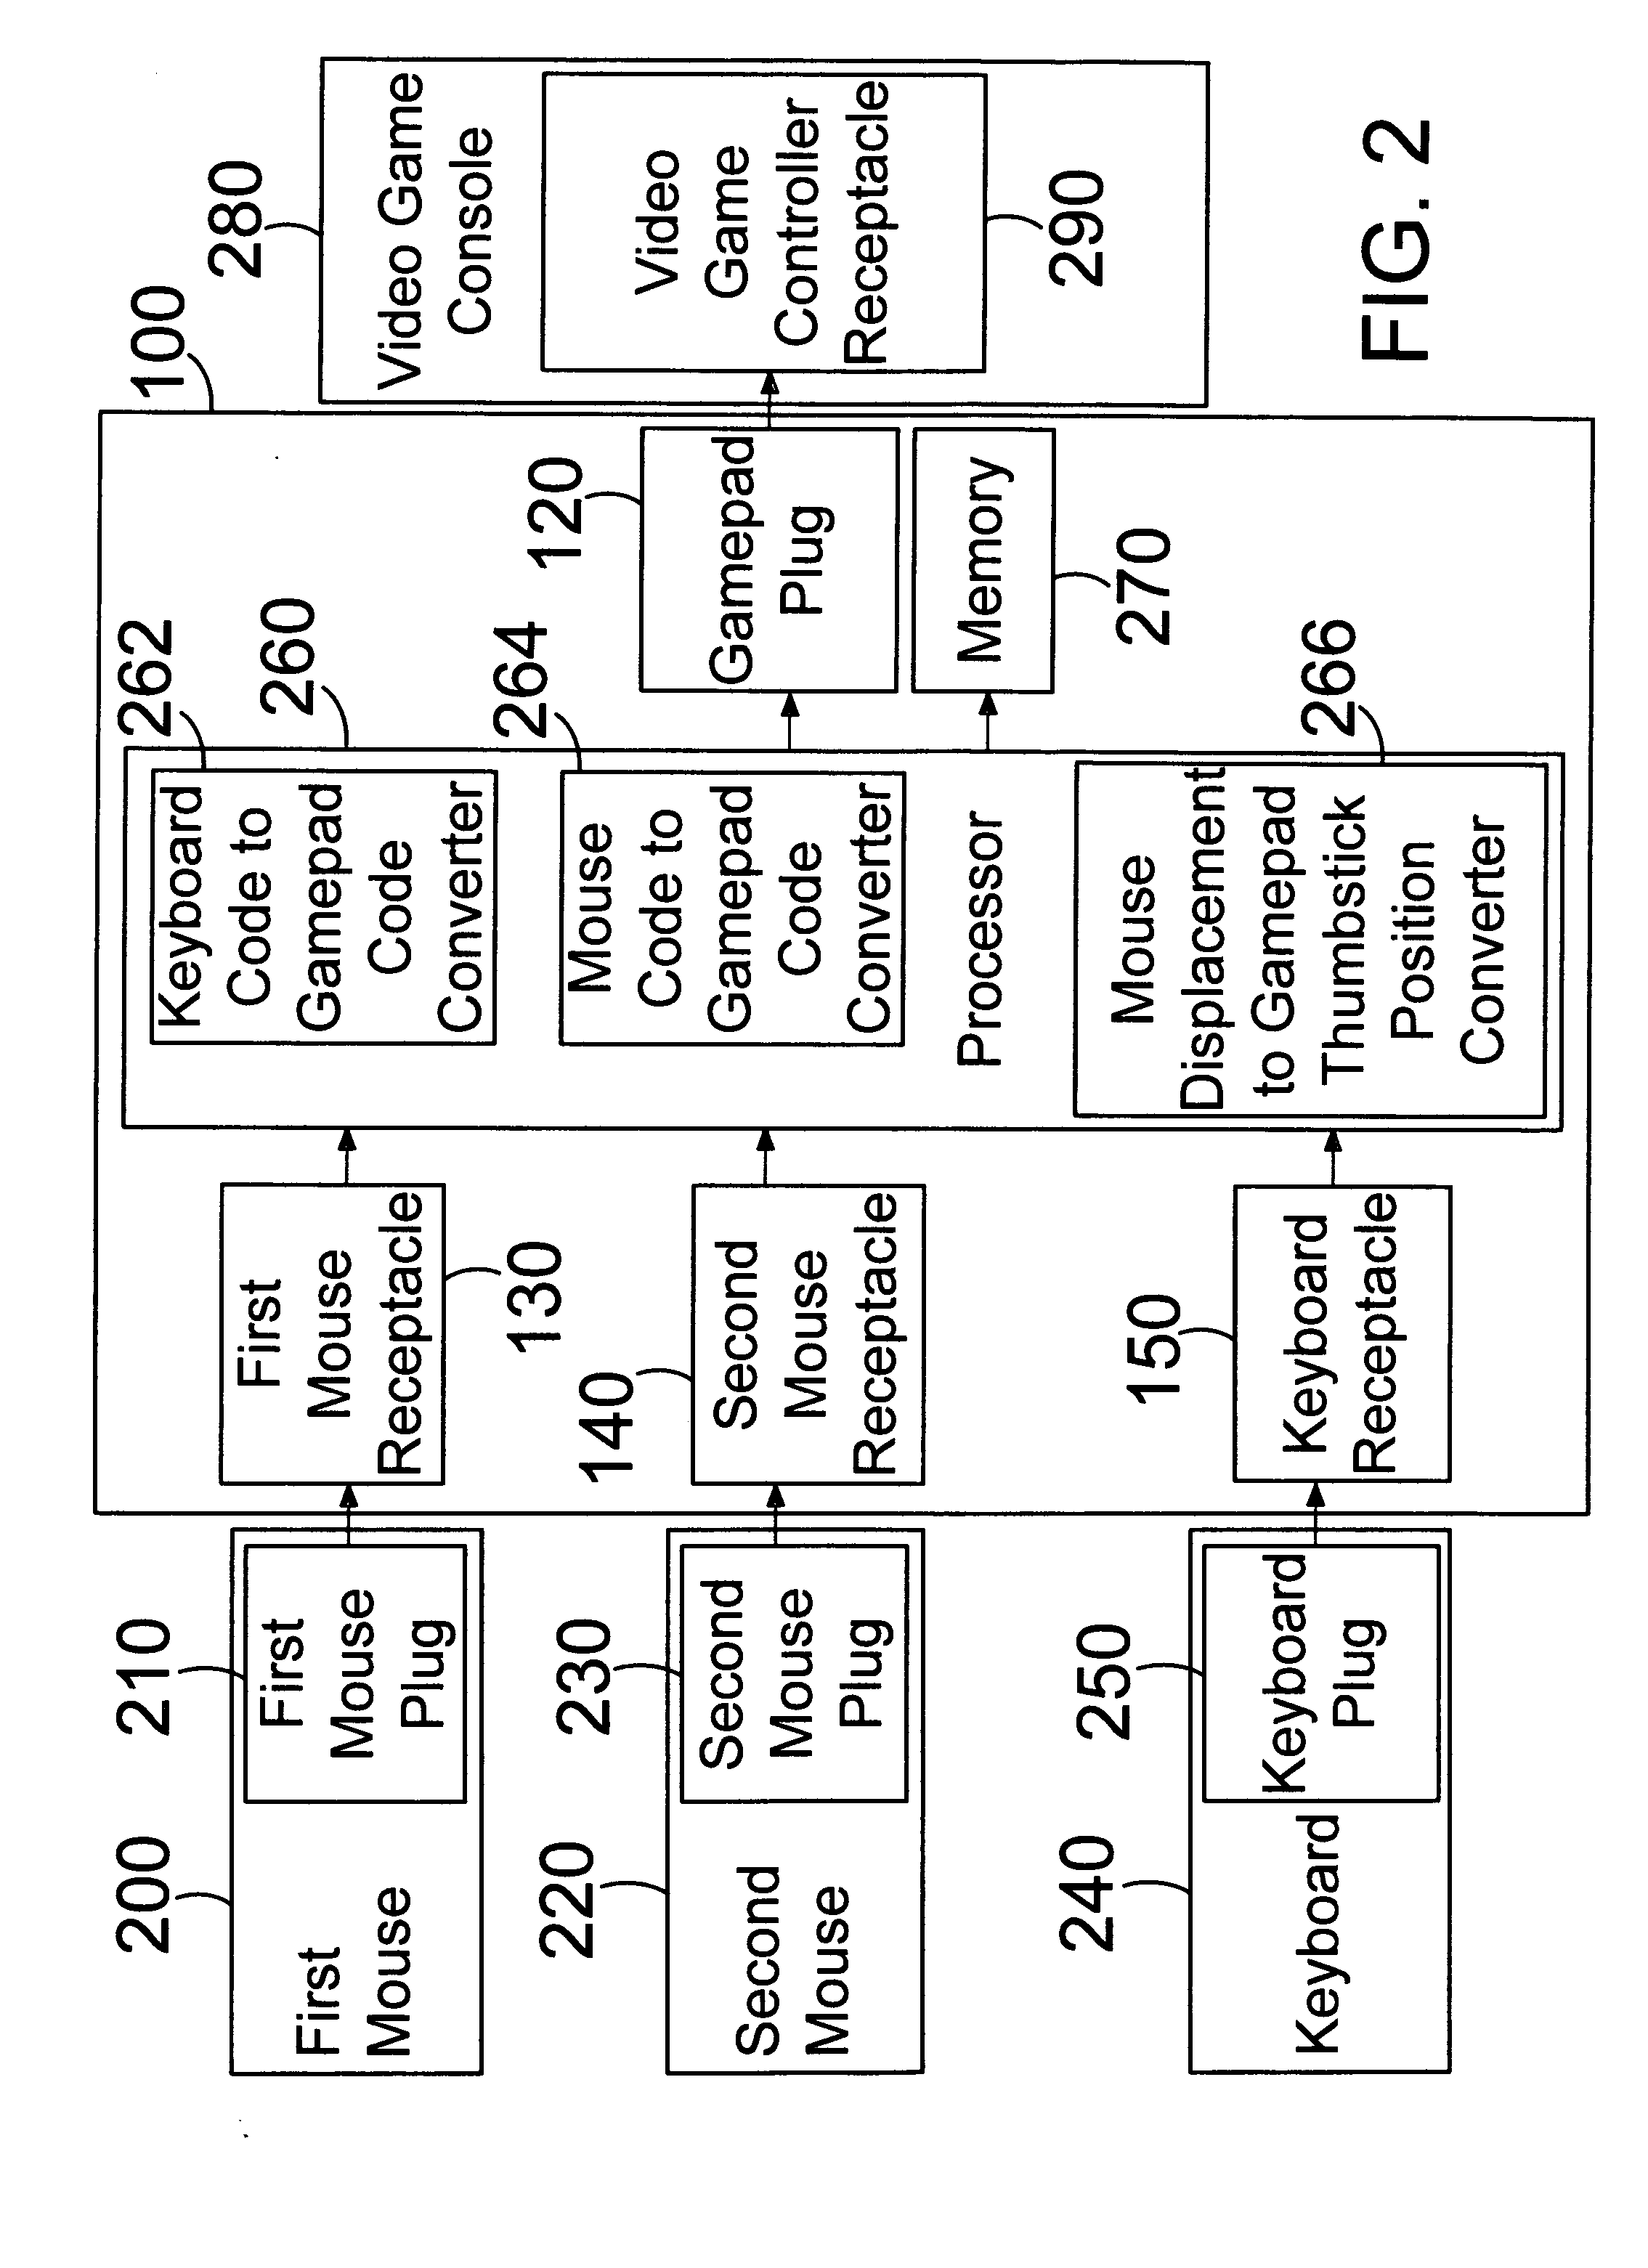 Method and apparatus for providing computer pointing device input to a video game console